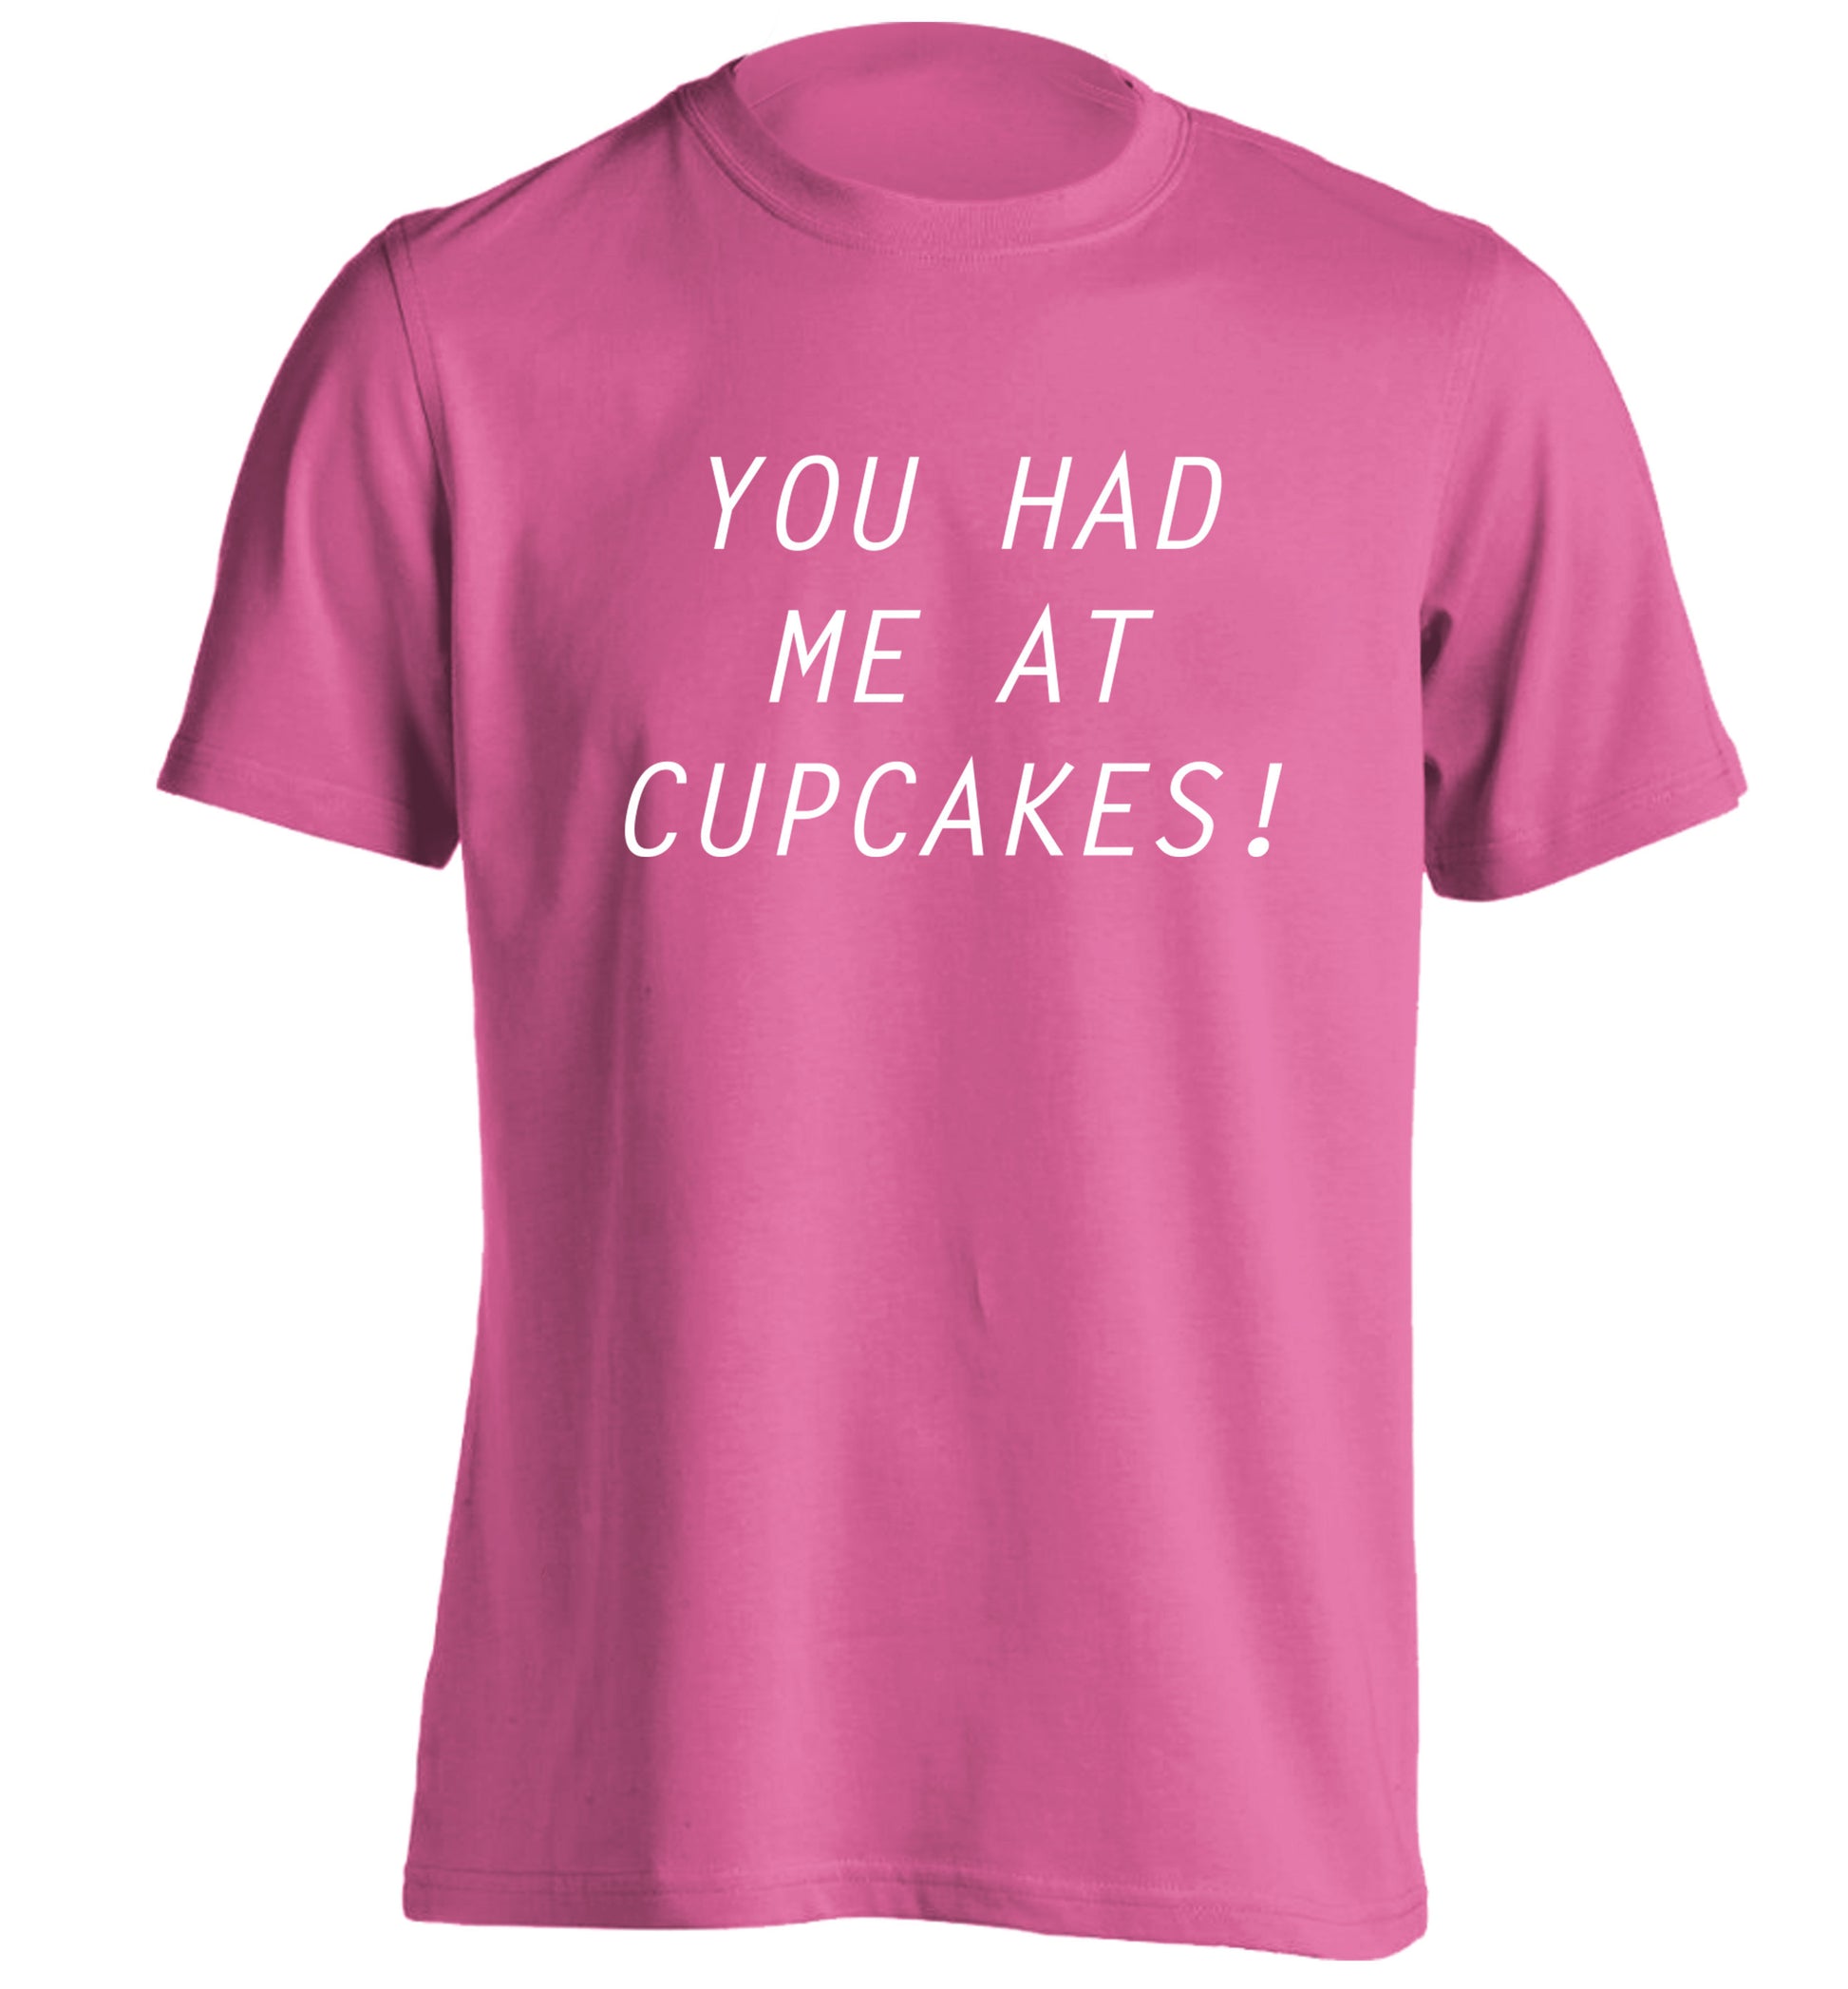 You had me at cupcakes adults unisex pink Tshirt 2XL